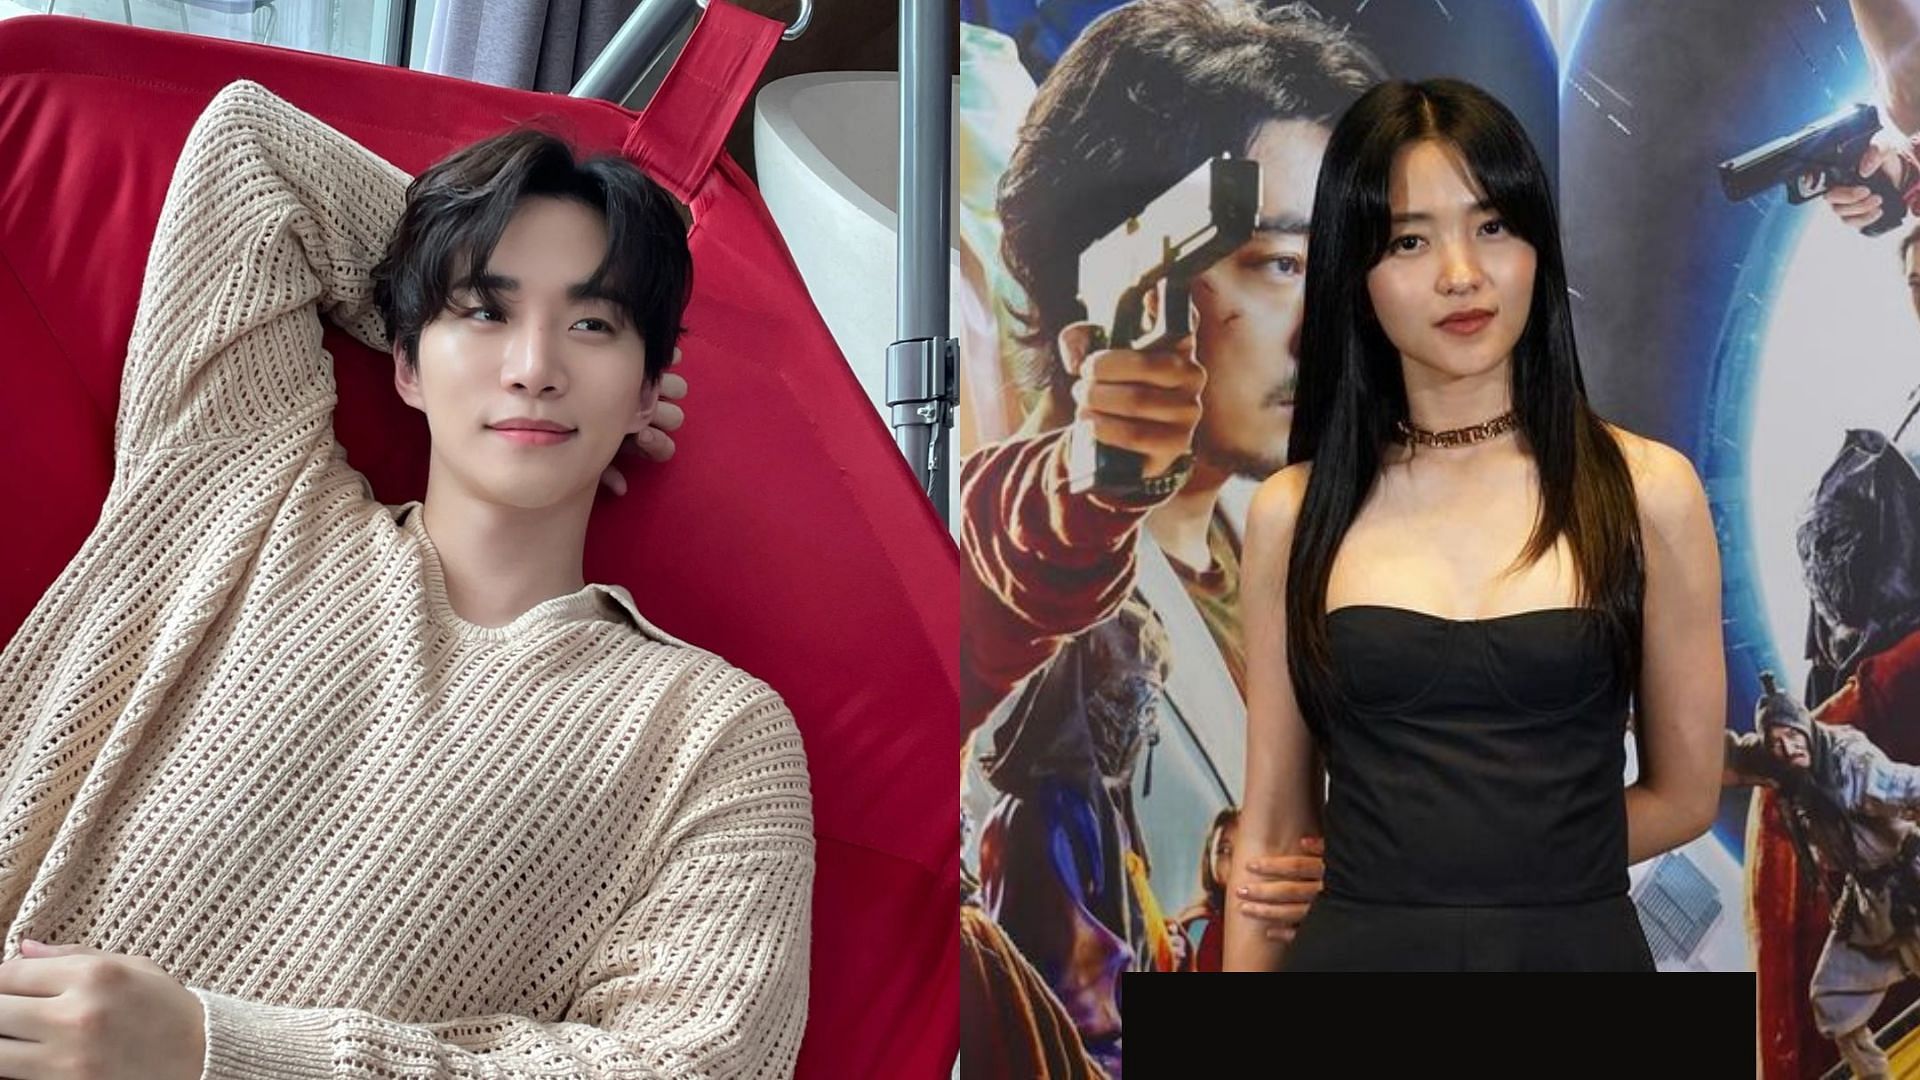 Lee Jun-ho, Kim Tae-ri and more confirmed to attend the 59th Baeksang Arts Awards as presenters (Images via Instagram/le2jh and kimtaeri_official)